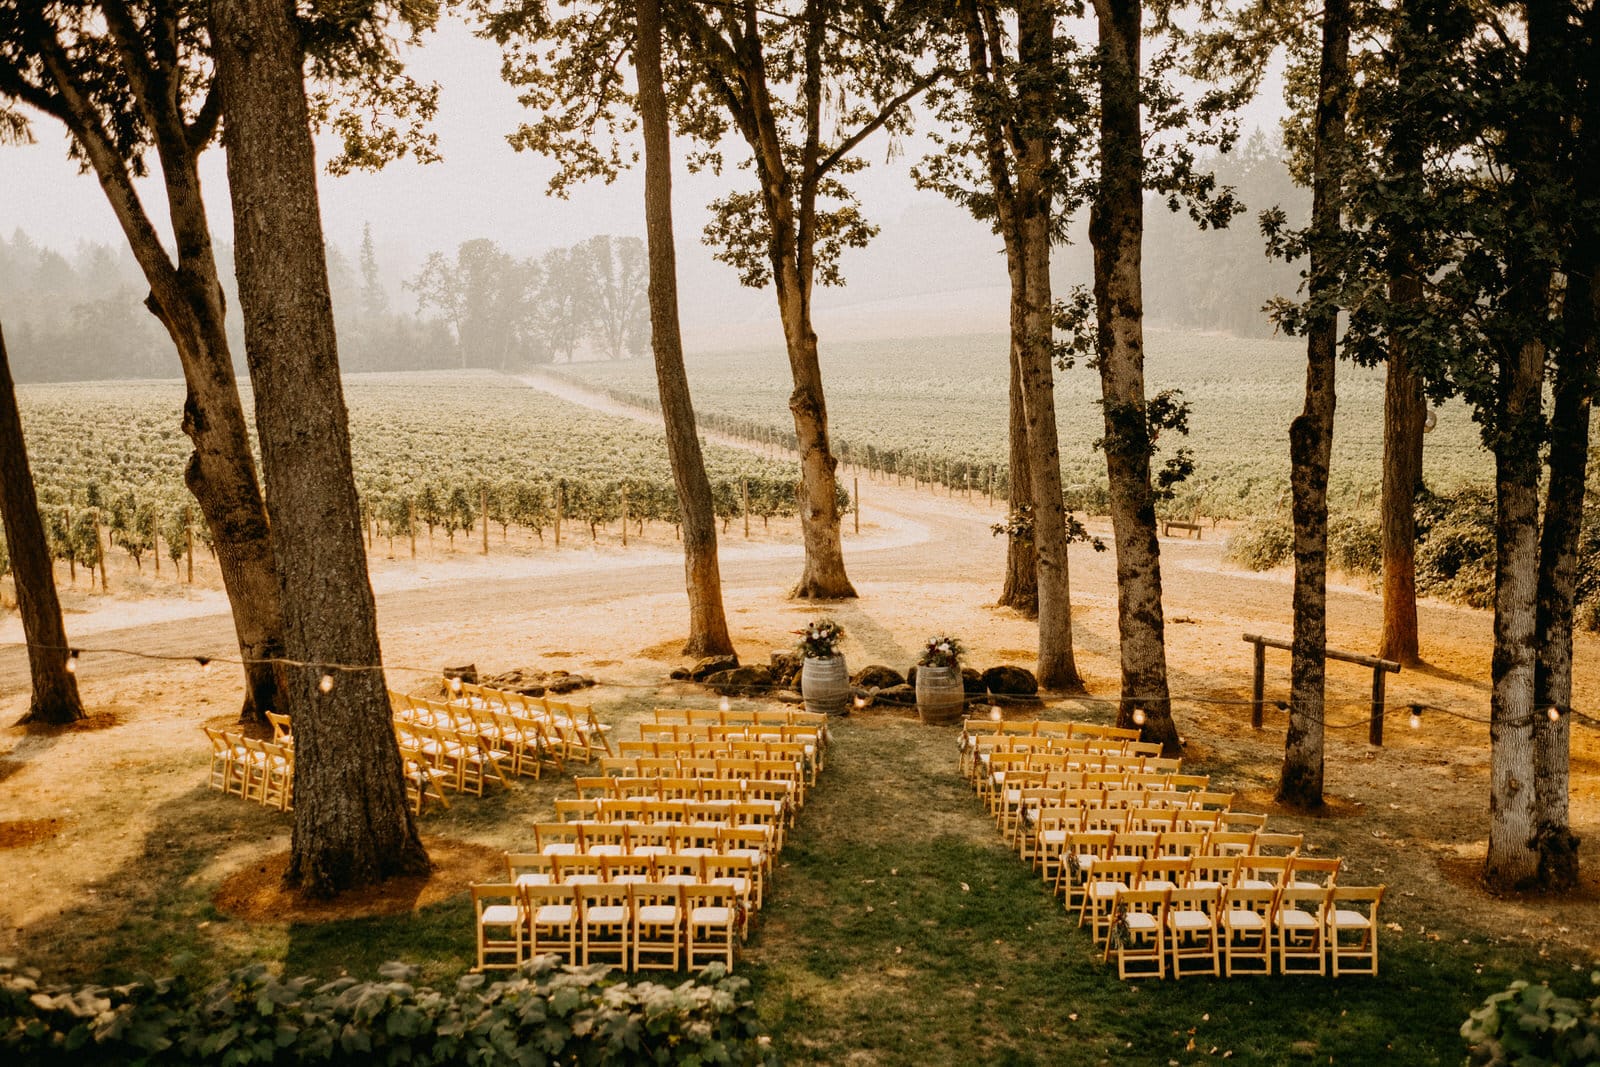 wineries to get married at in Oregon - venues like domaine d broglie make for amazing wedding and elopement locations near Portland